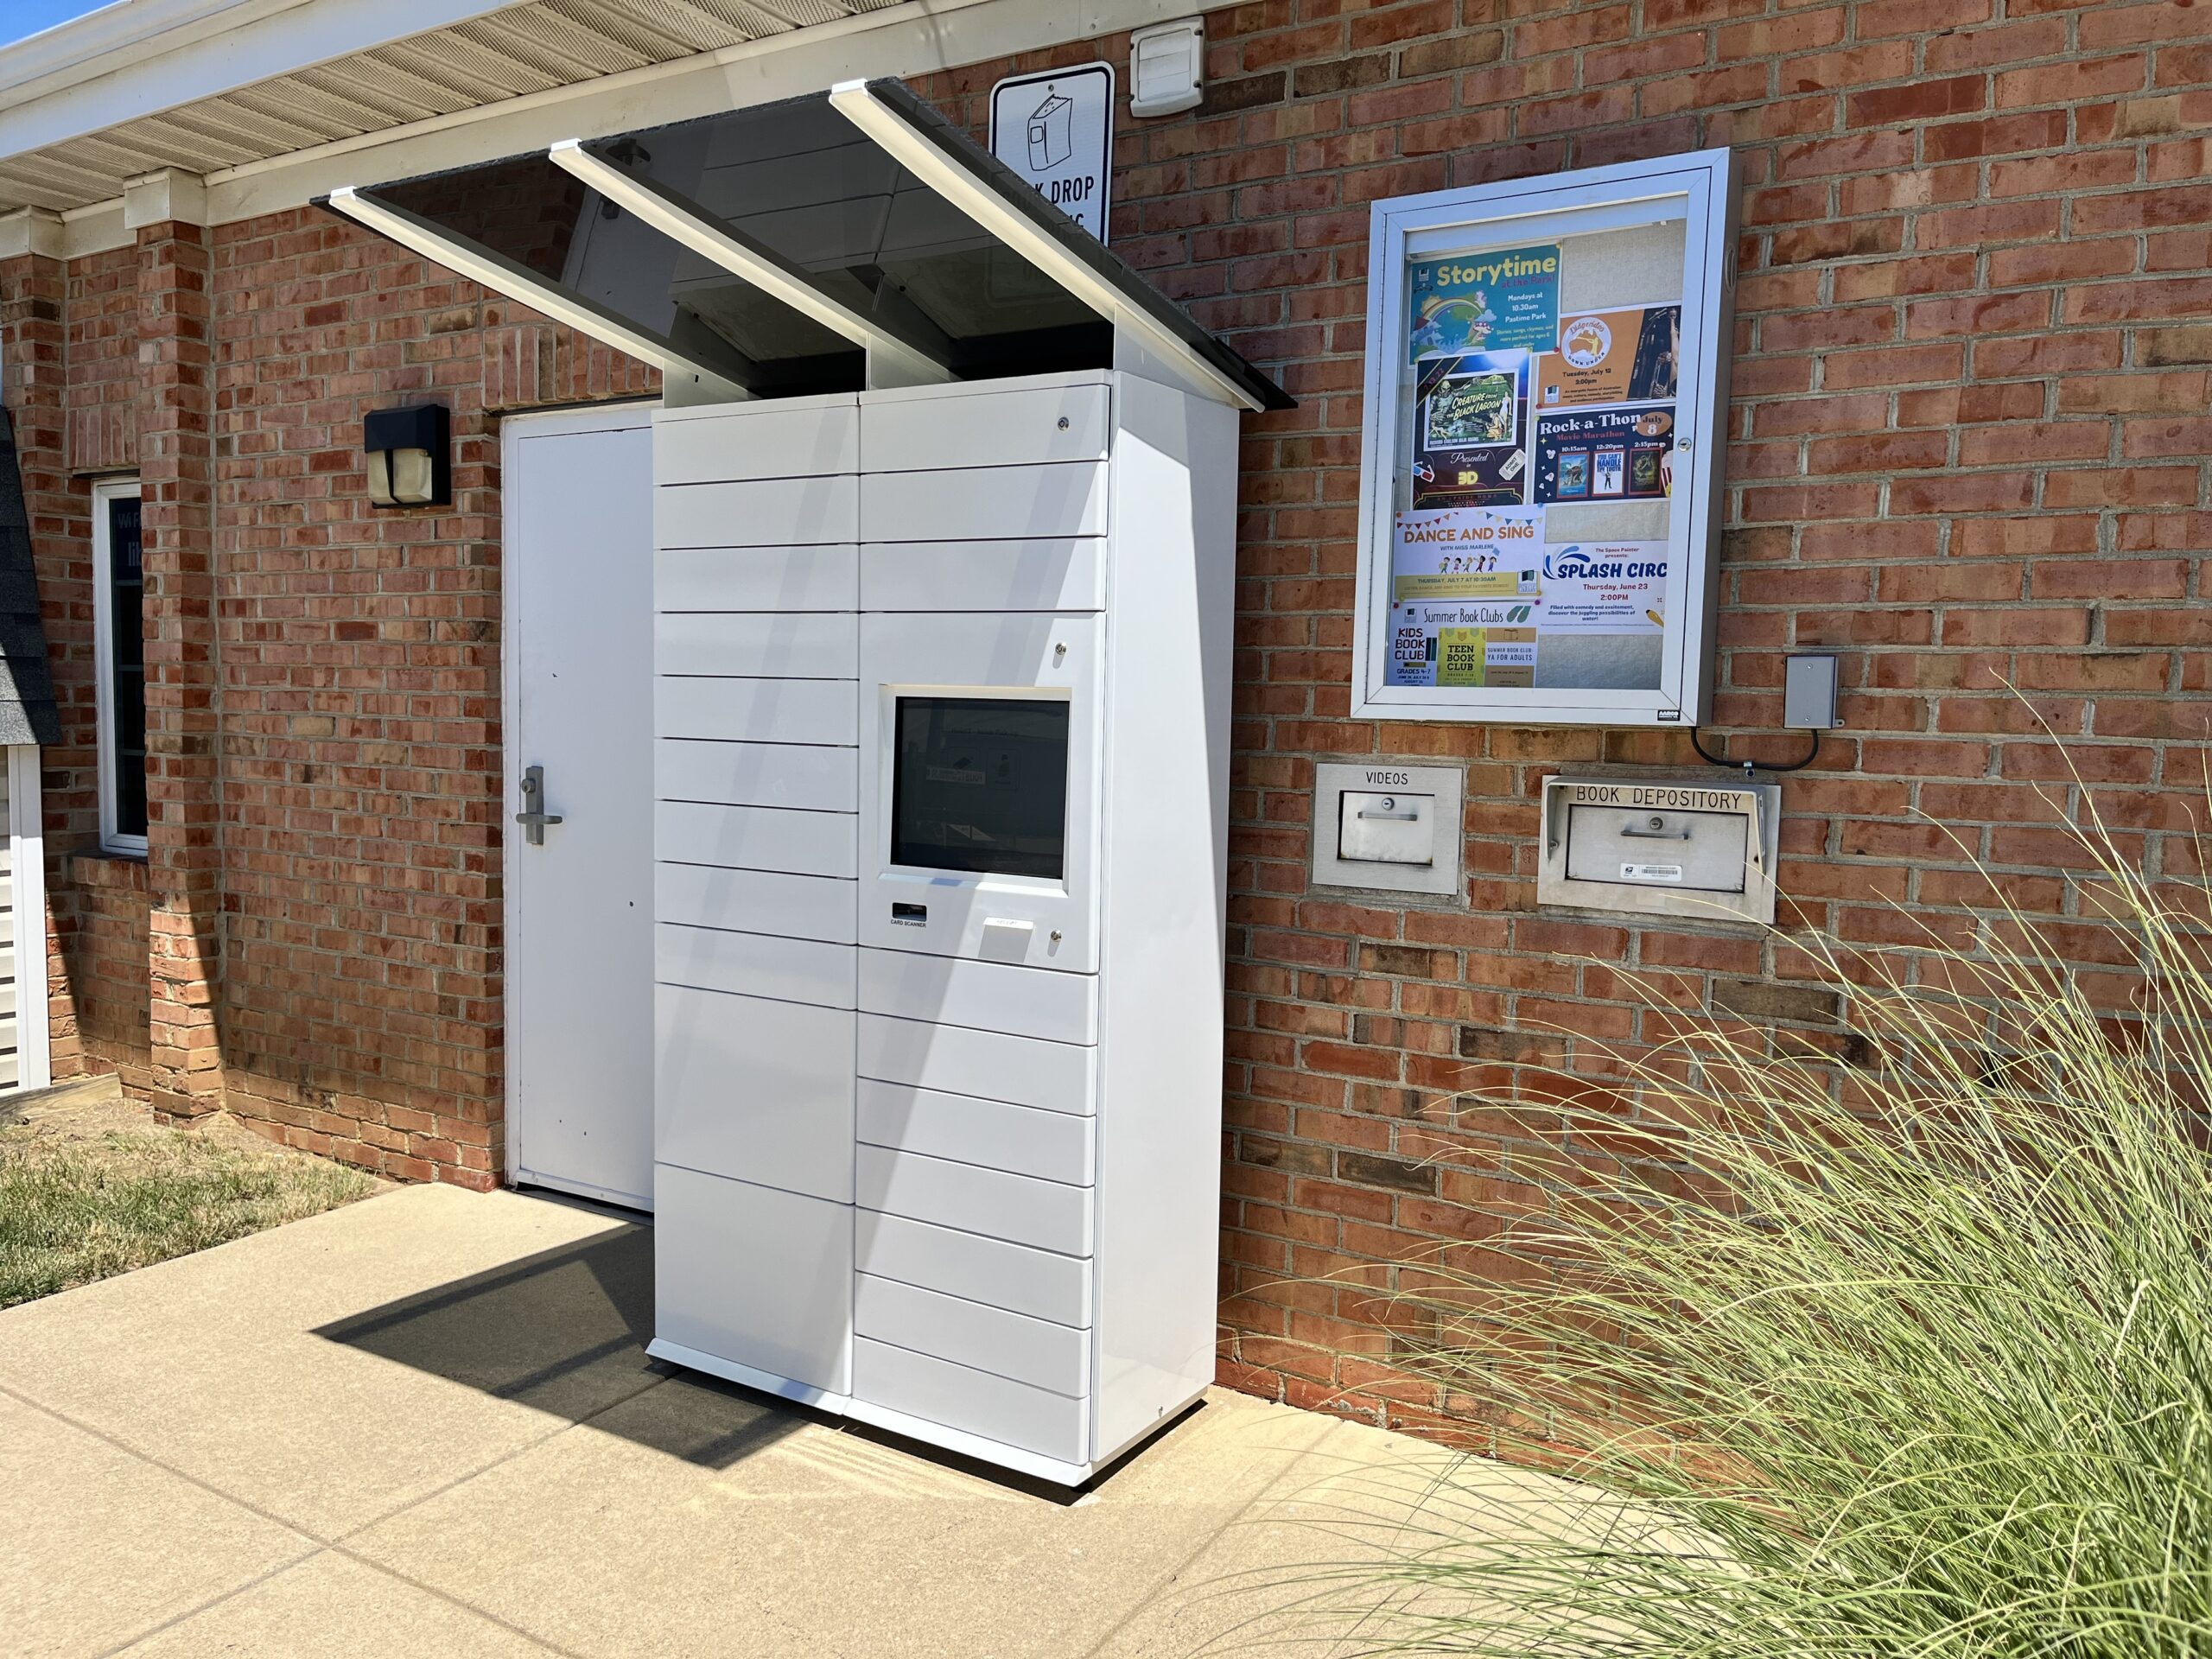 A photograph of the library's pickup lockers, located against the rear of the building on the sidewalk next to the book drop.